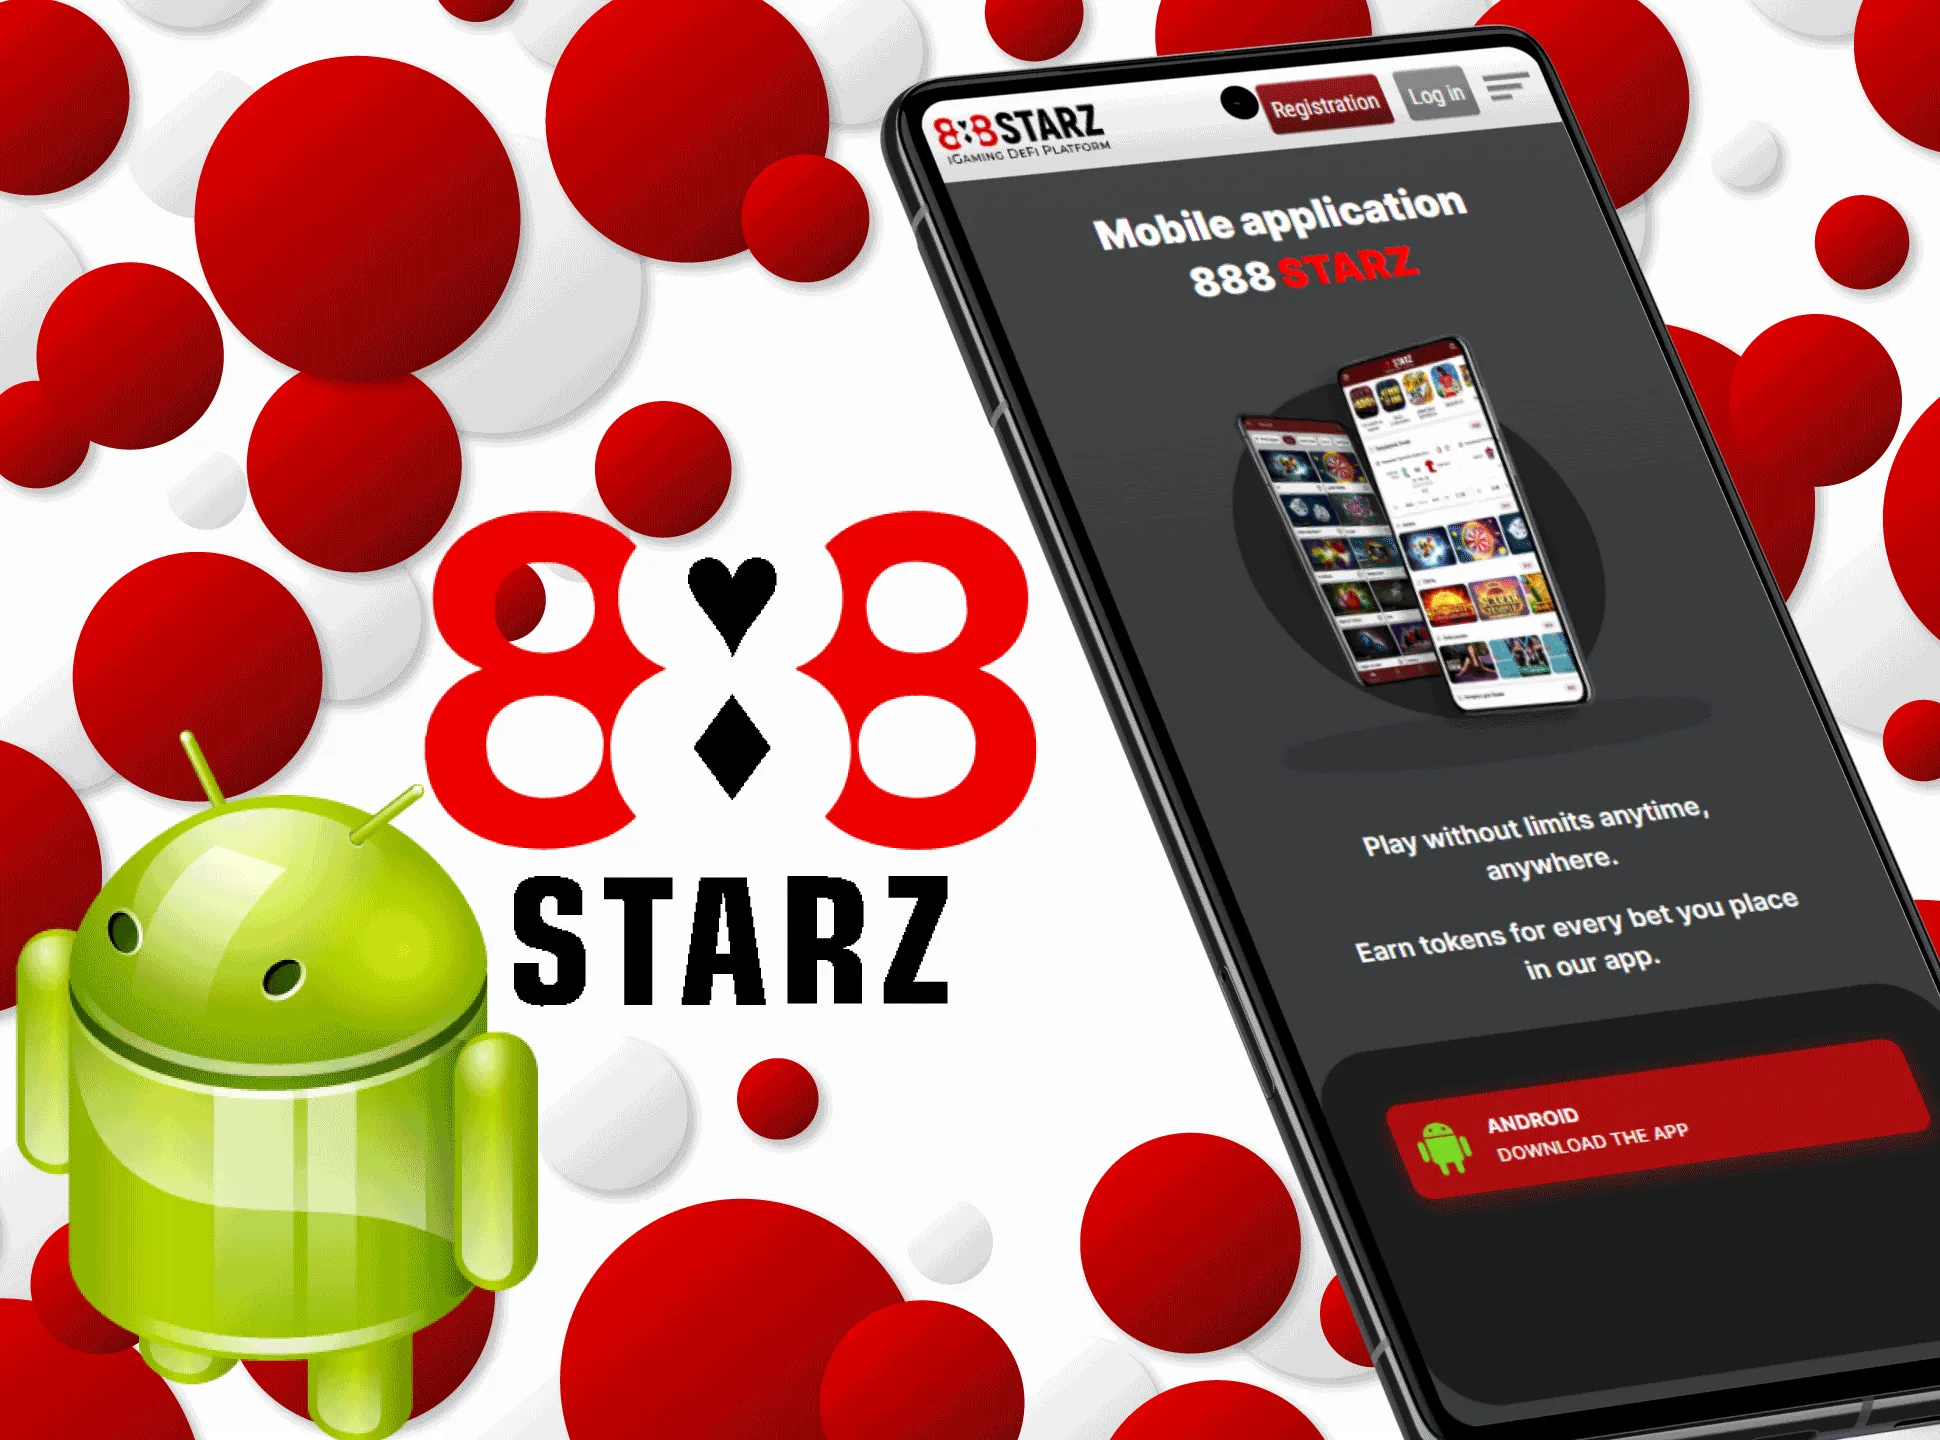 Download the 888starz app to bet on your Android smartphone.